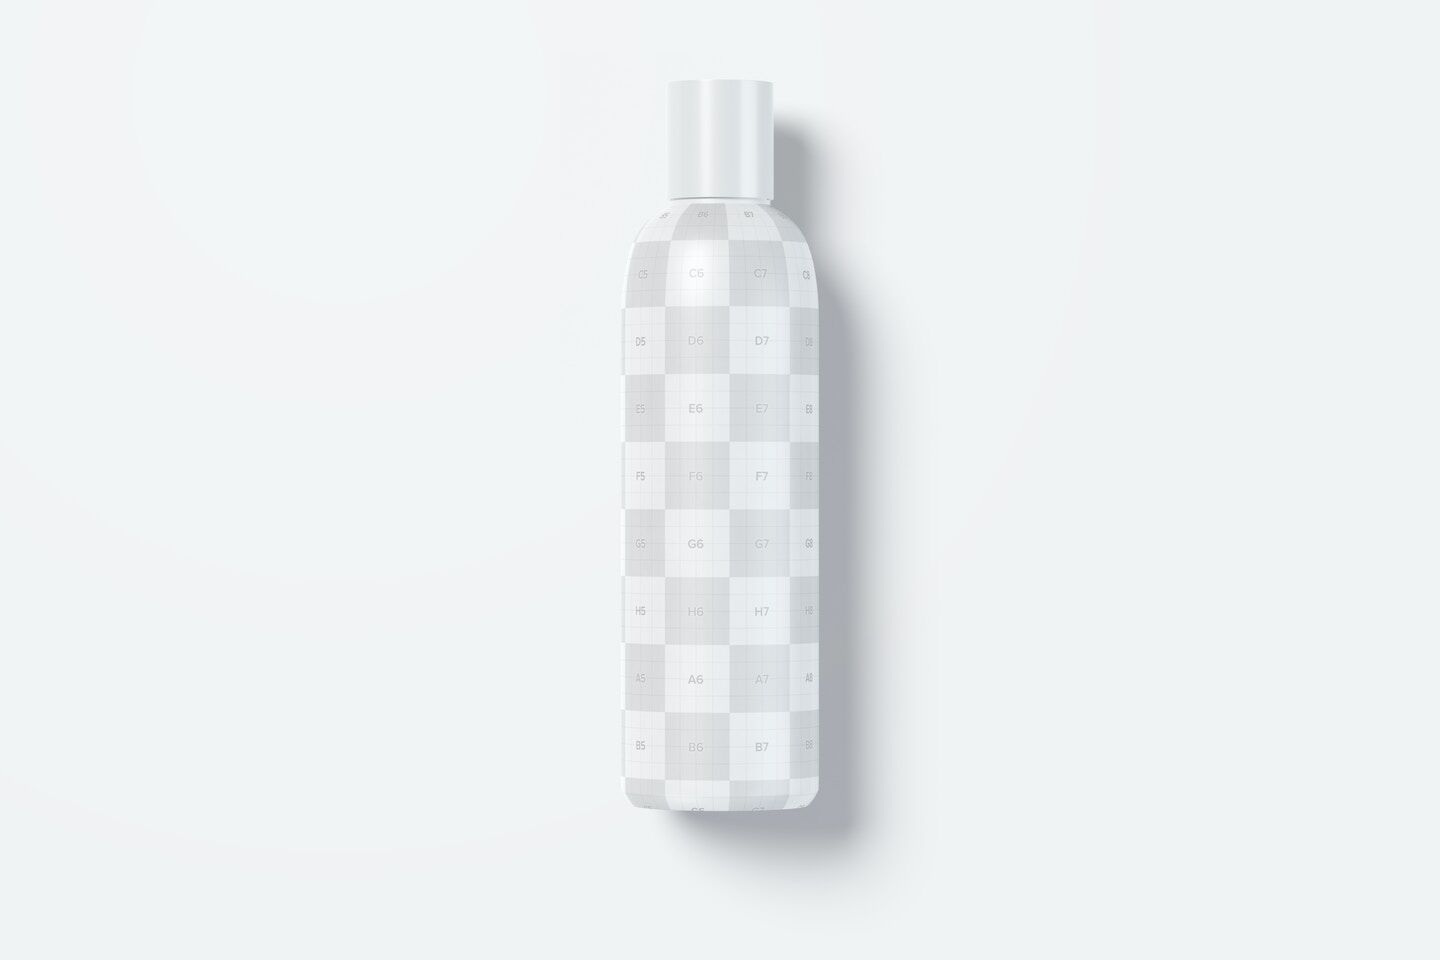 Mockup Displaying Front View of a Cosmo Cosmetic Bottle FREE PSD